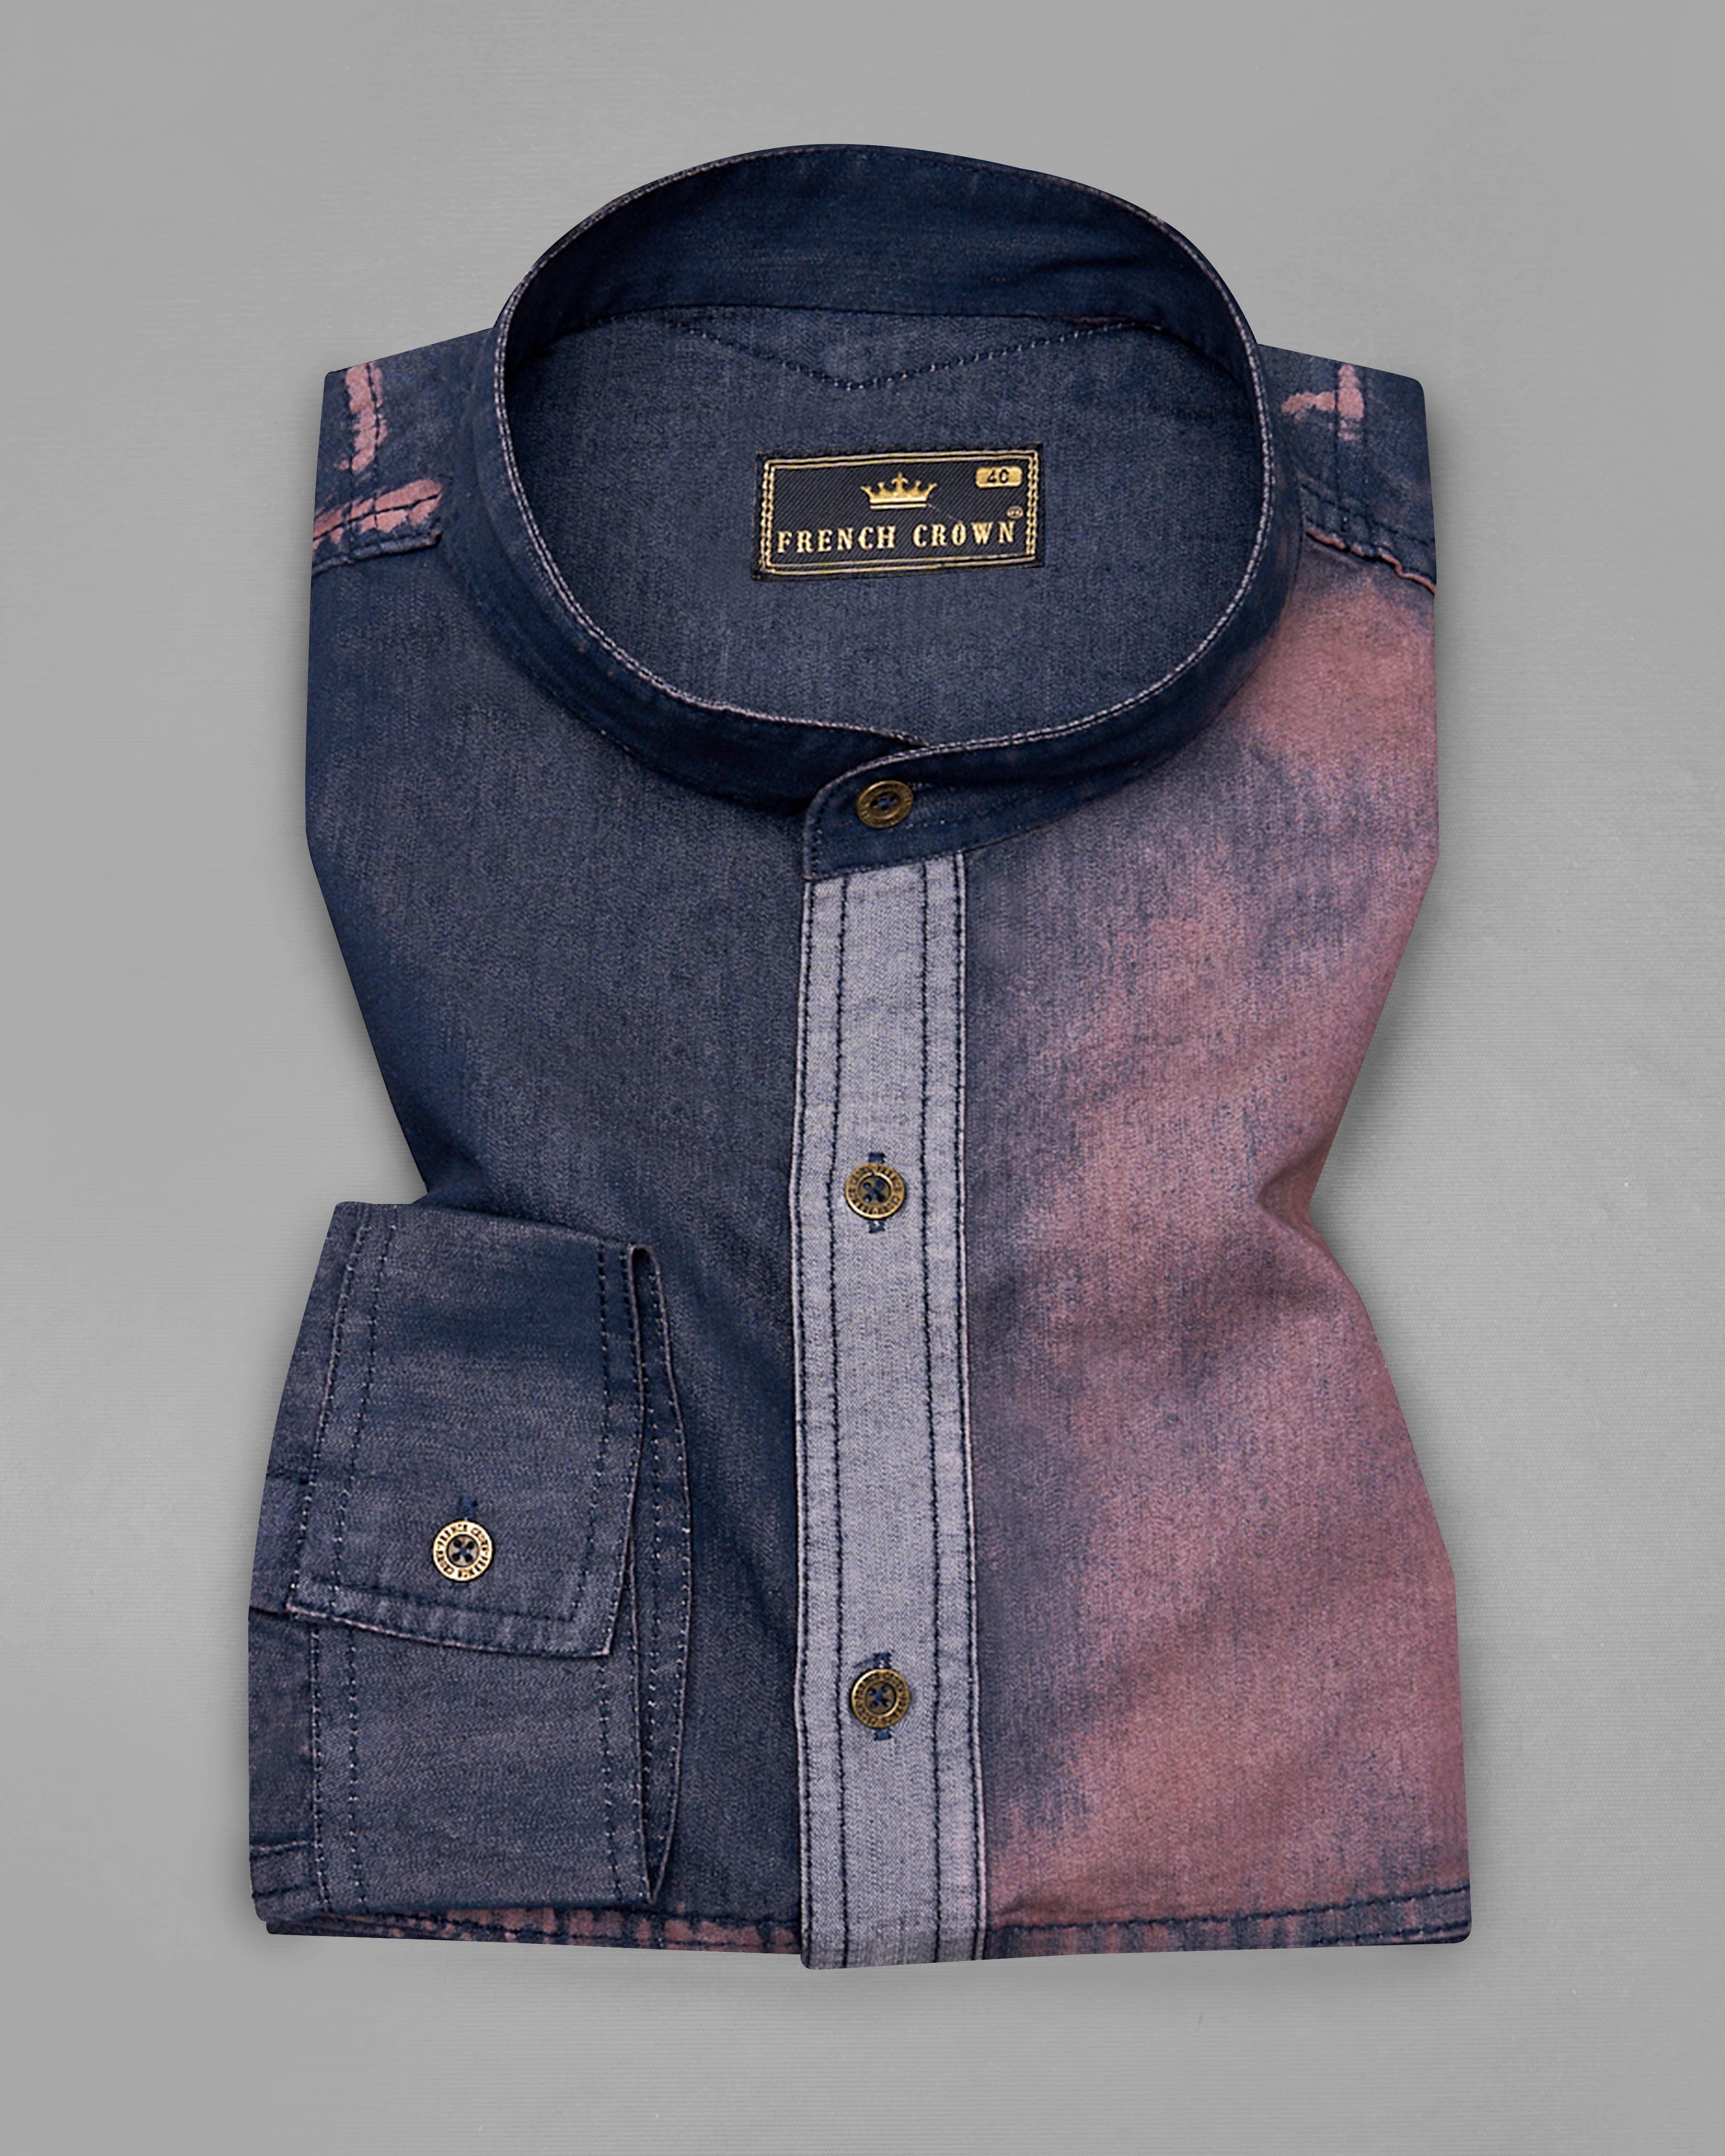 Bunting Blue with Opium Rusted Denim Shirt  With Leather Patch Work 9206-M-MB-38,9206-M-MB-H-38,9206-M-MB-39,9206-M-MB-H-39,9206-M-MB-40,9206-M-MB-H-40,9206-M-MB-42,9206-M-MB-H-42,9206-M-MB-44,9206-M-MB-H-44,9206-M-MB-46,9206-M-MB-H-46,9206-M-MB-48,9206-M-MB-H-48,9206-M-MB-50,9206-M-MB-H-50,9206-M-MB-52,9206-M-MB-H-52